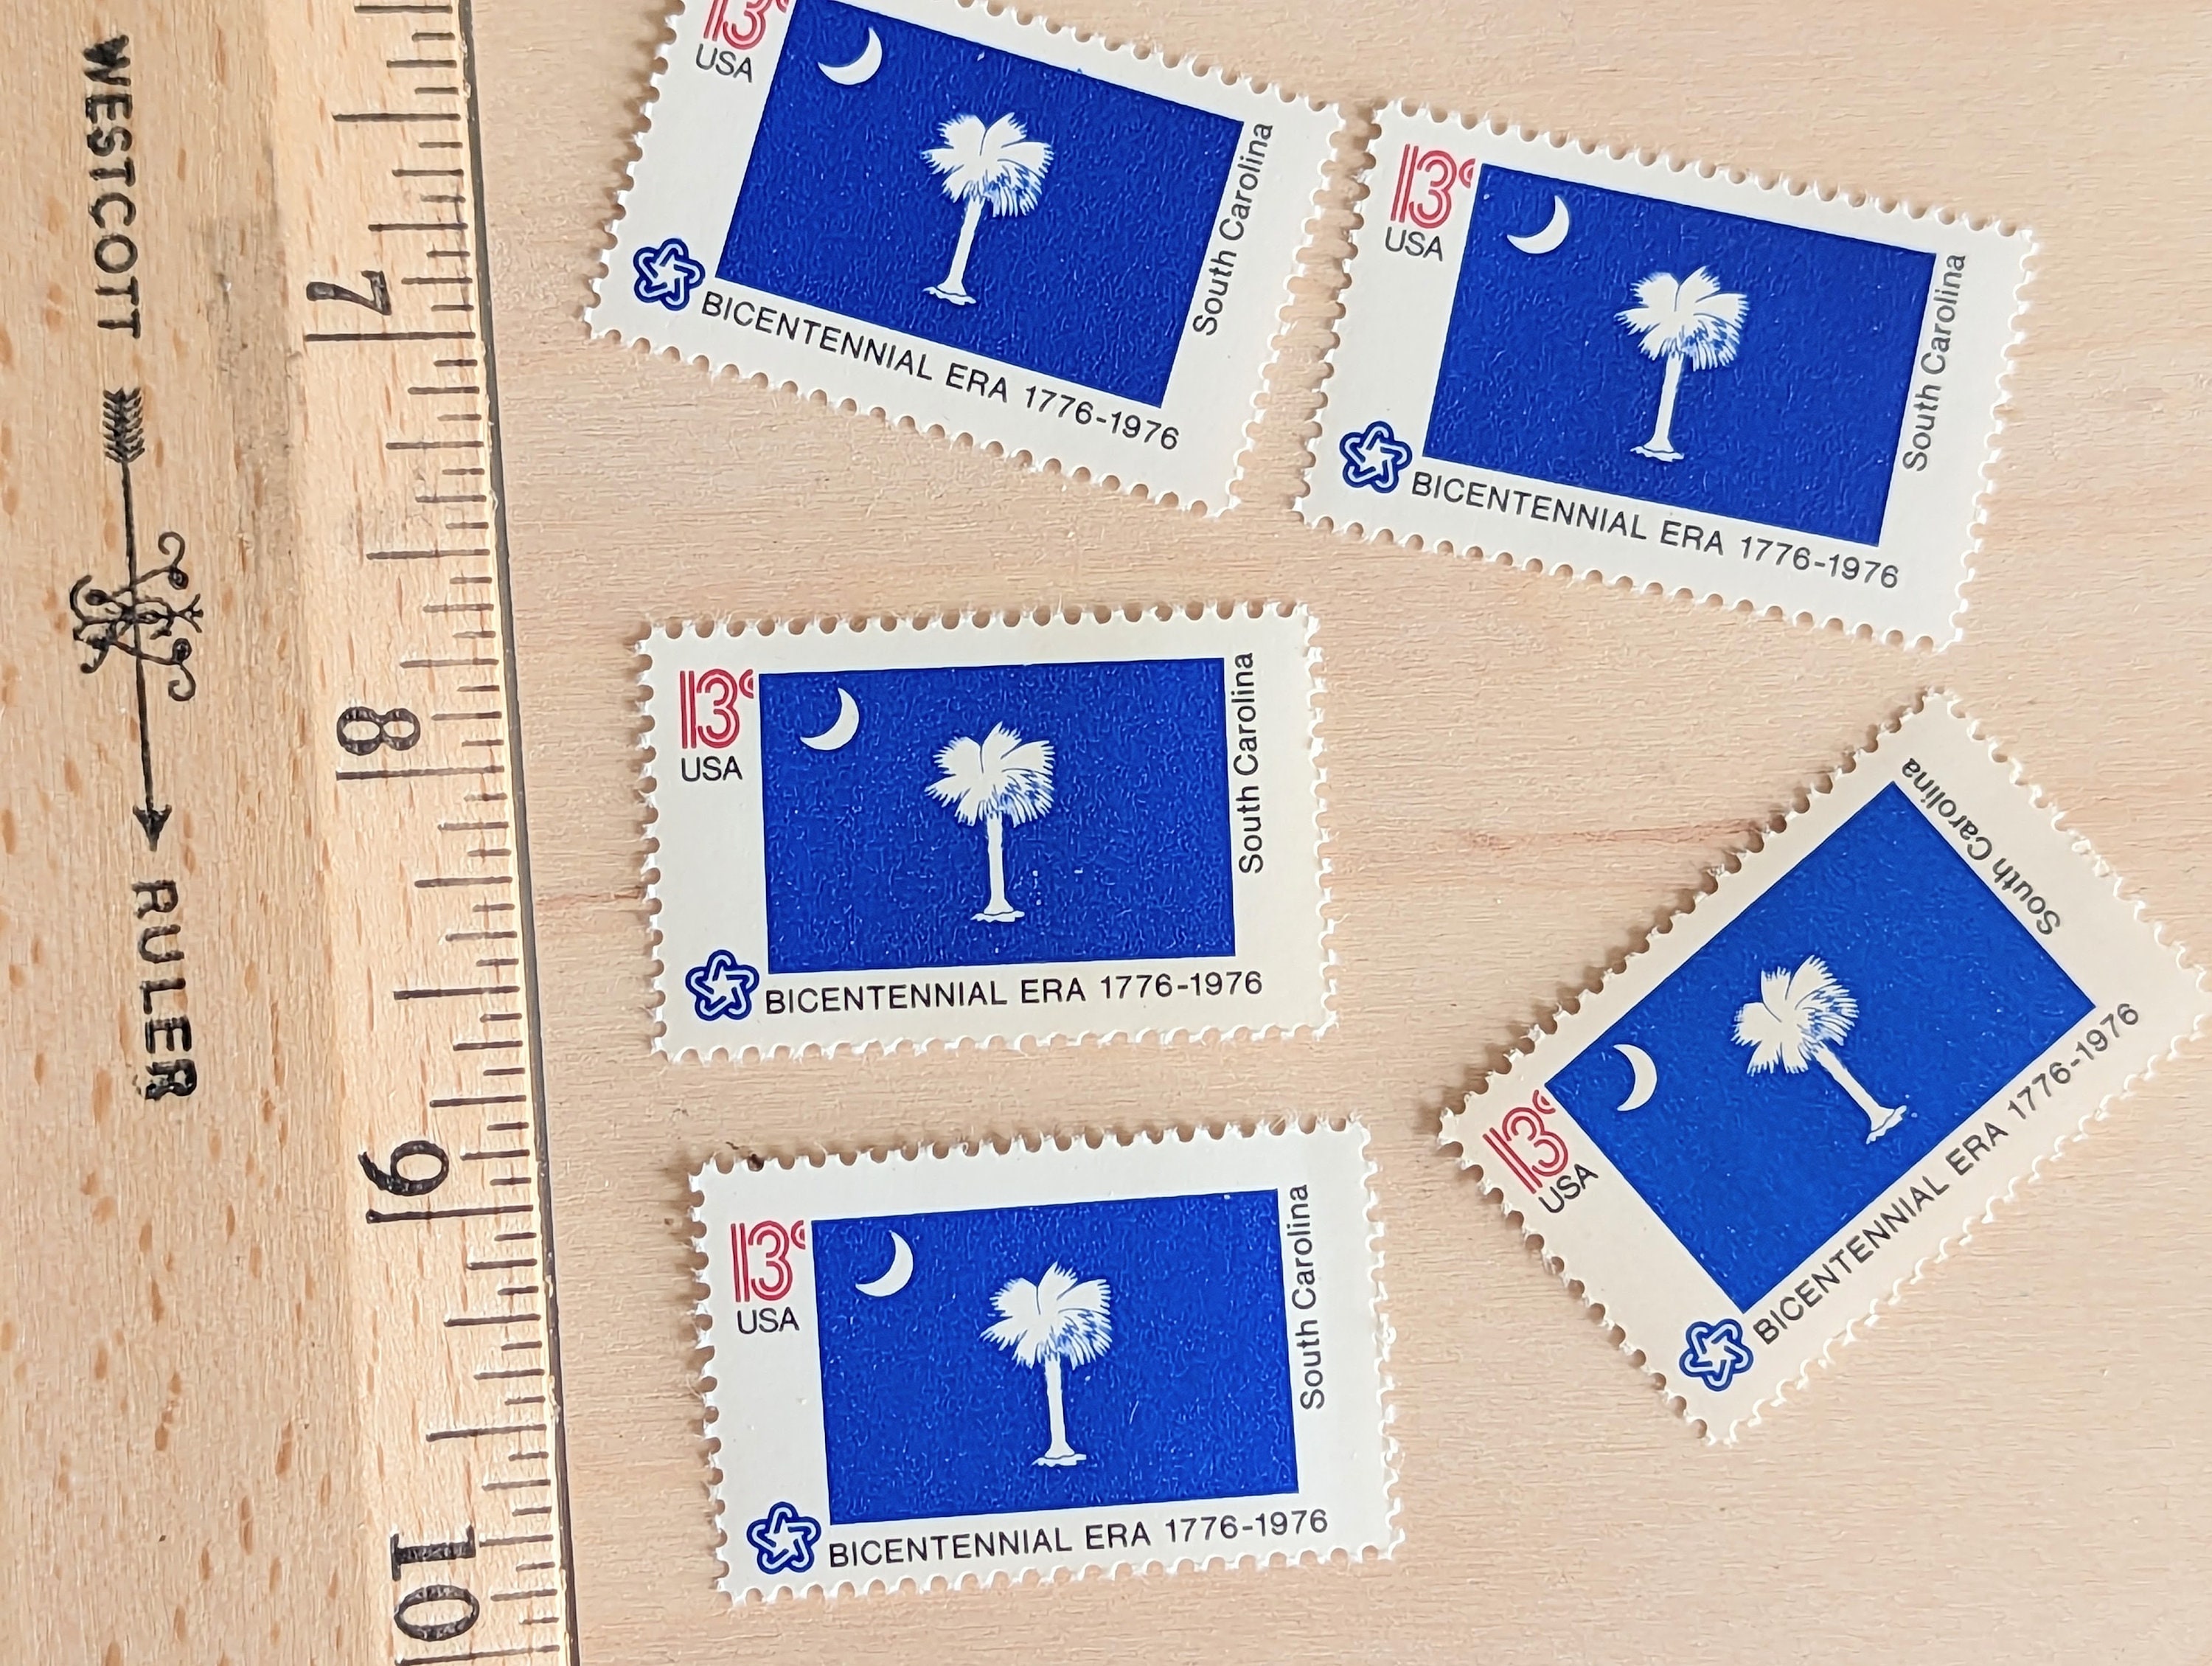 TEN 13c Maryland State Flag Stamp Vintage Unused US Postage Stamps Nautical  Wedding Annapolis Baltimore Boats Stamps for Mailing 